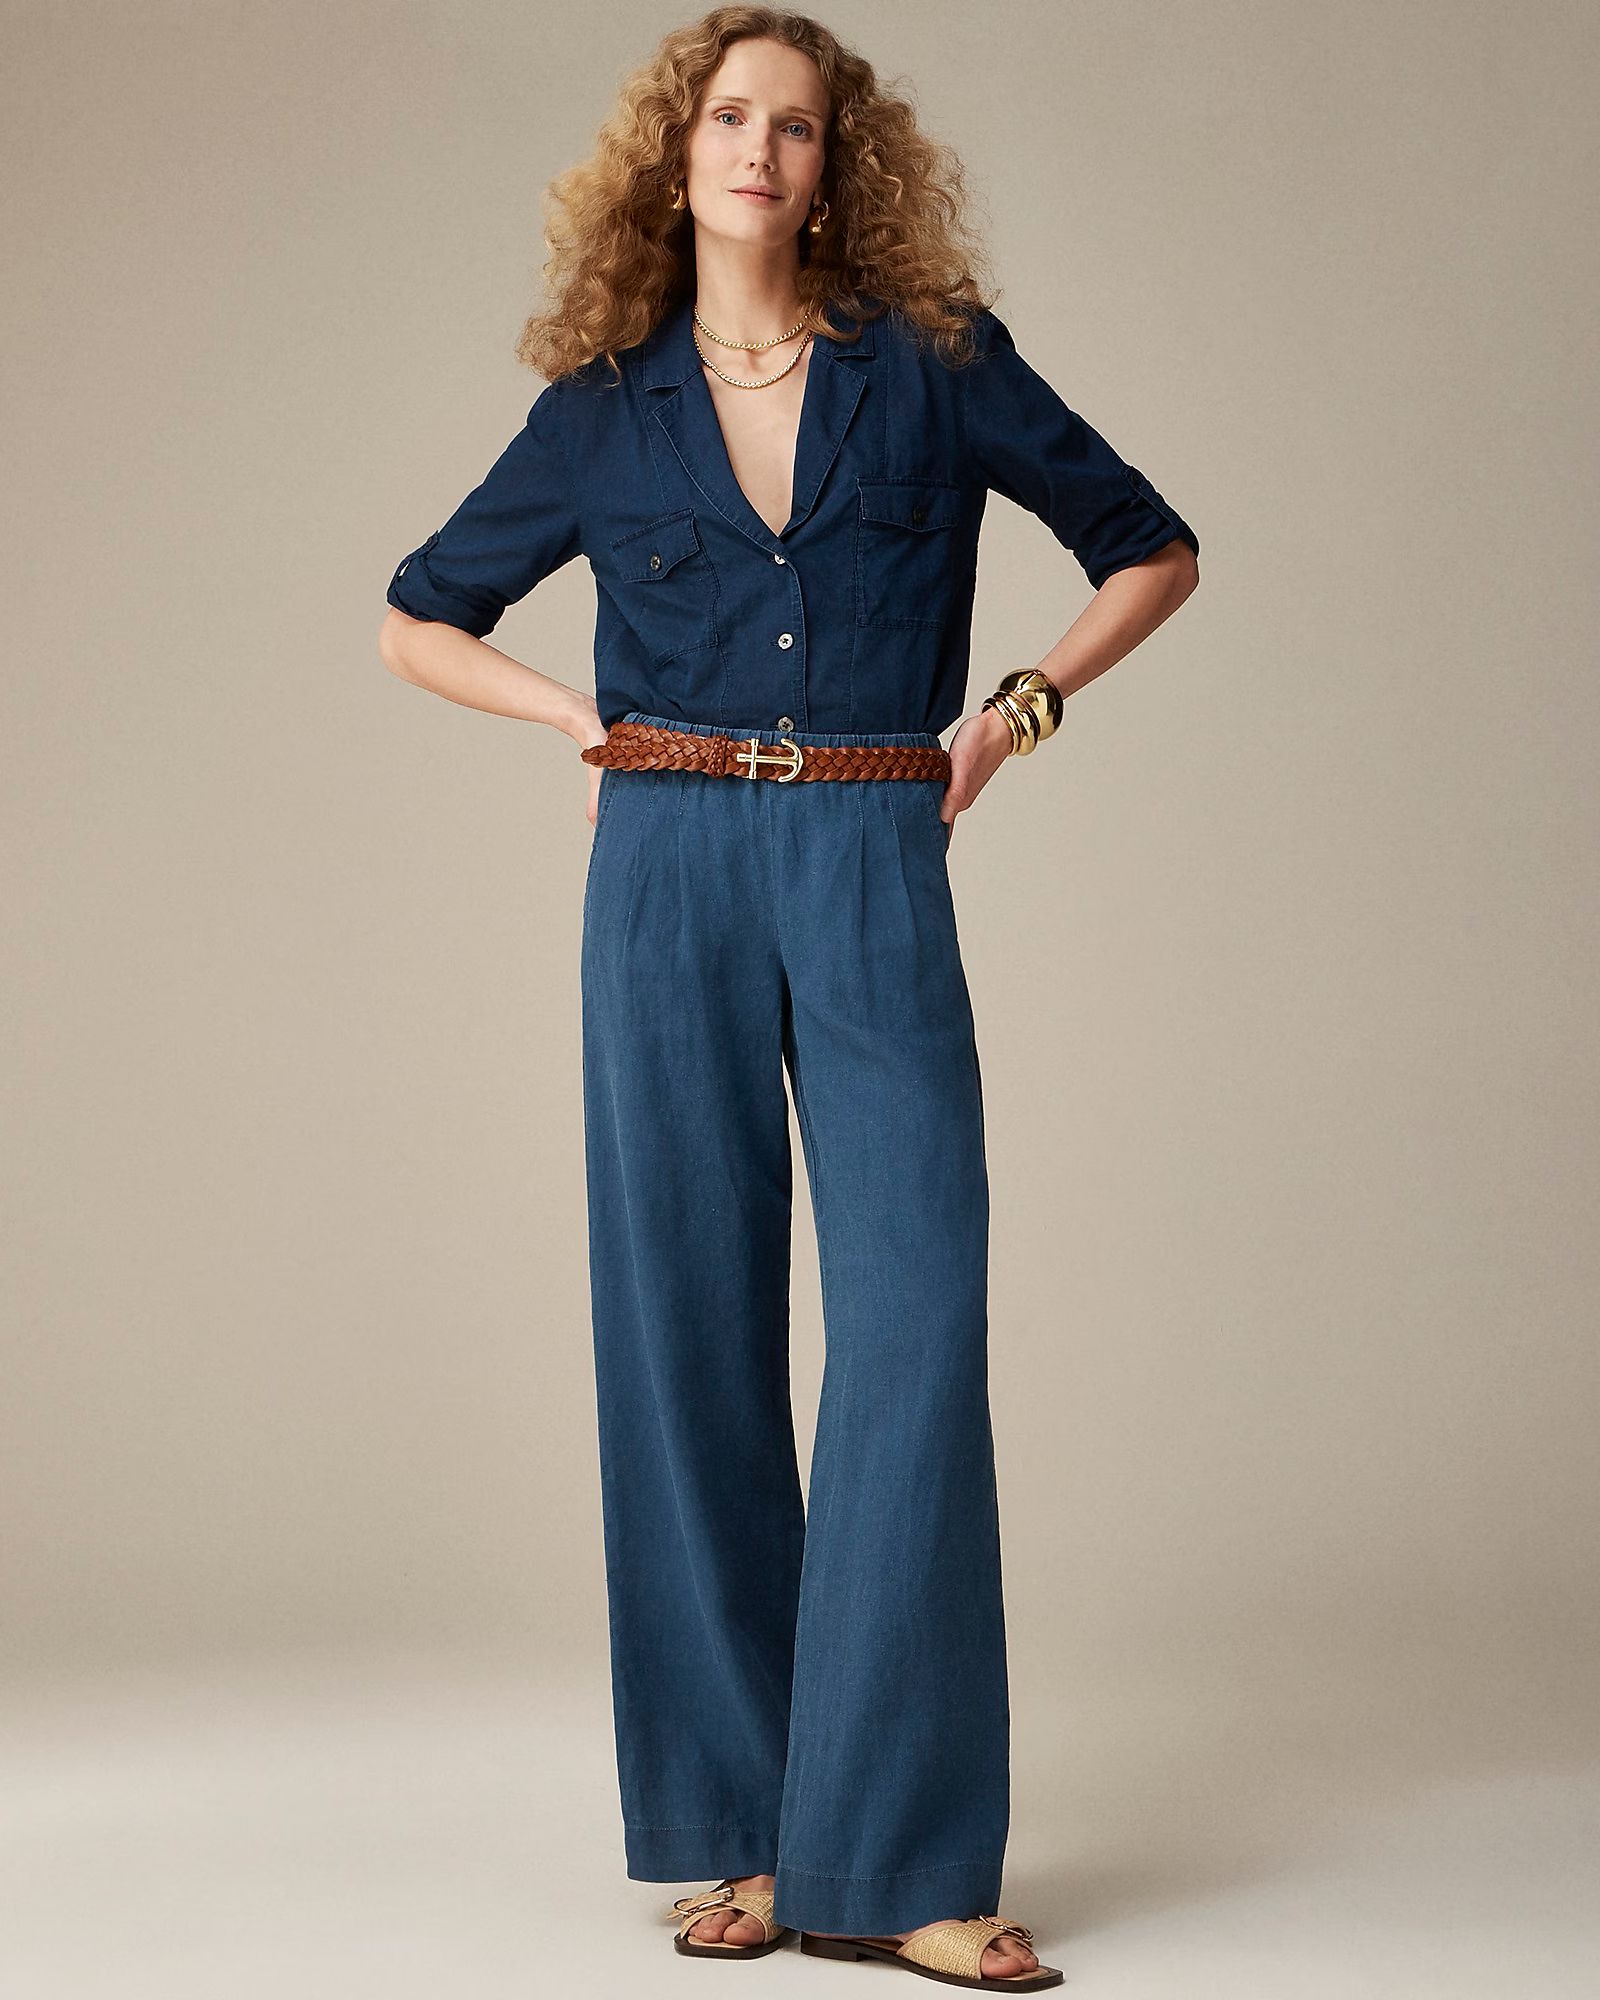 Shop this looknewPleated pull-on pant in indigo linen blend$158.00Mista WashSelect a sizeSize & F... | J.Crew US